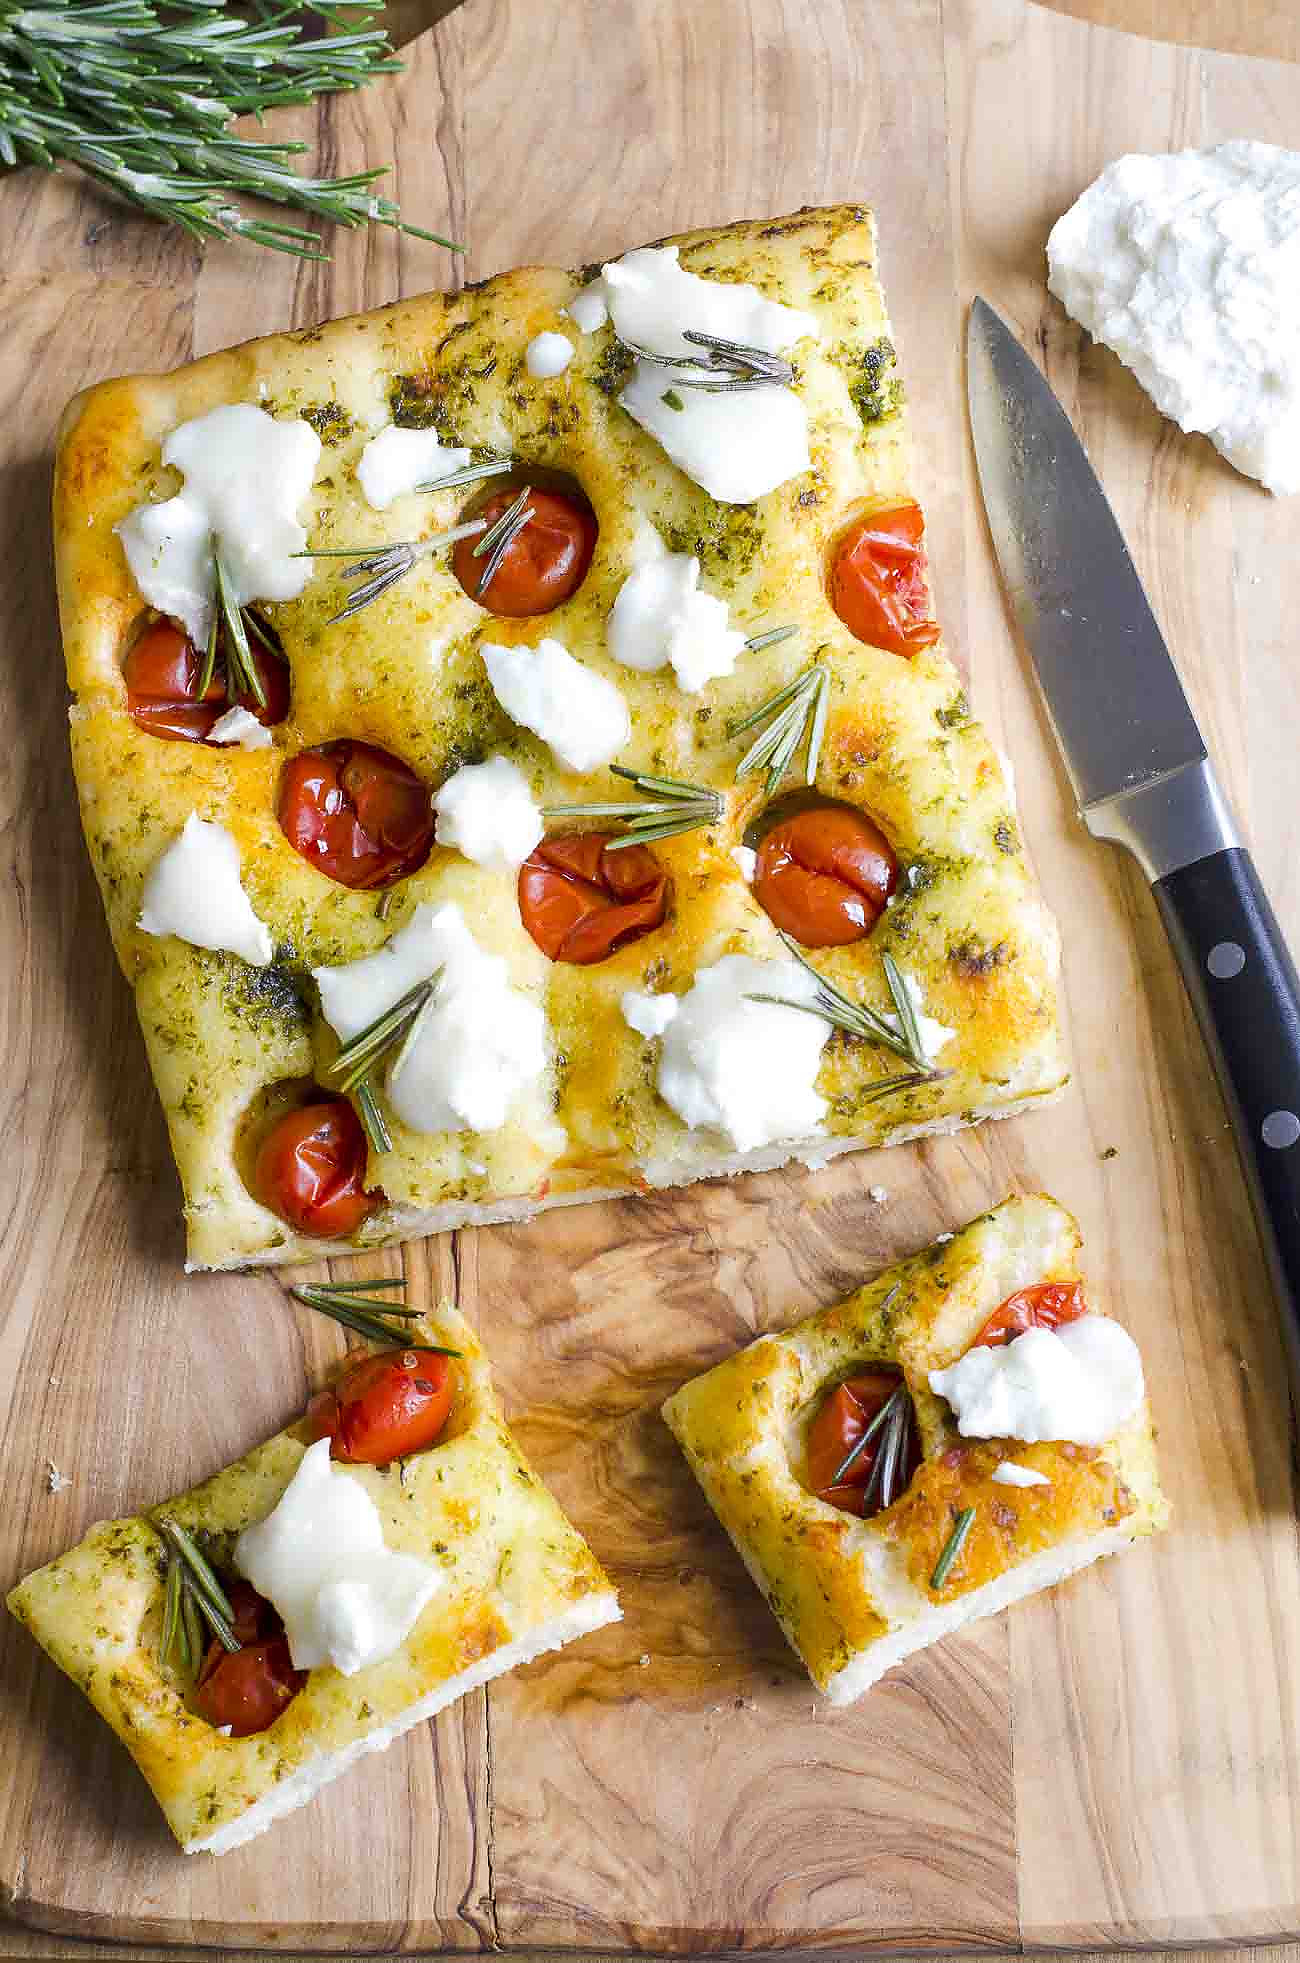 Focaccia Bread Recipe With Cherry Tomatoes, Basil Pesto And Goat Cheese 